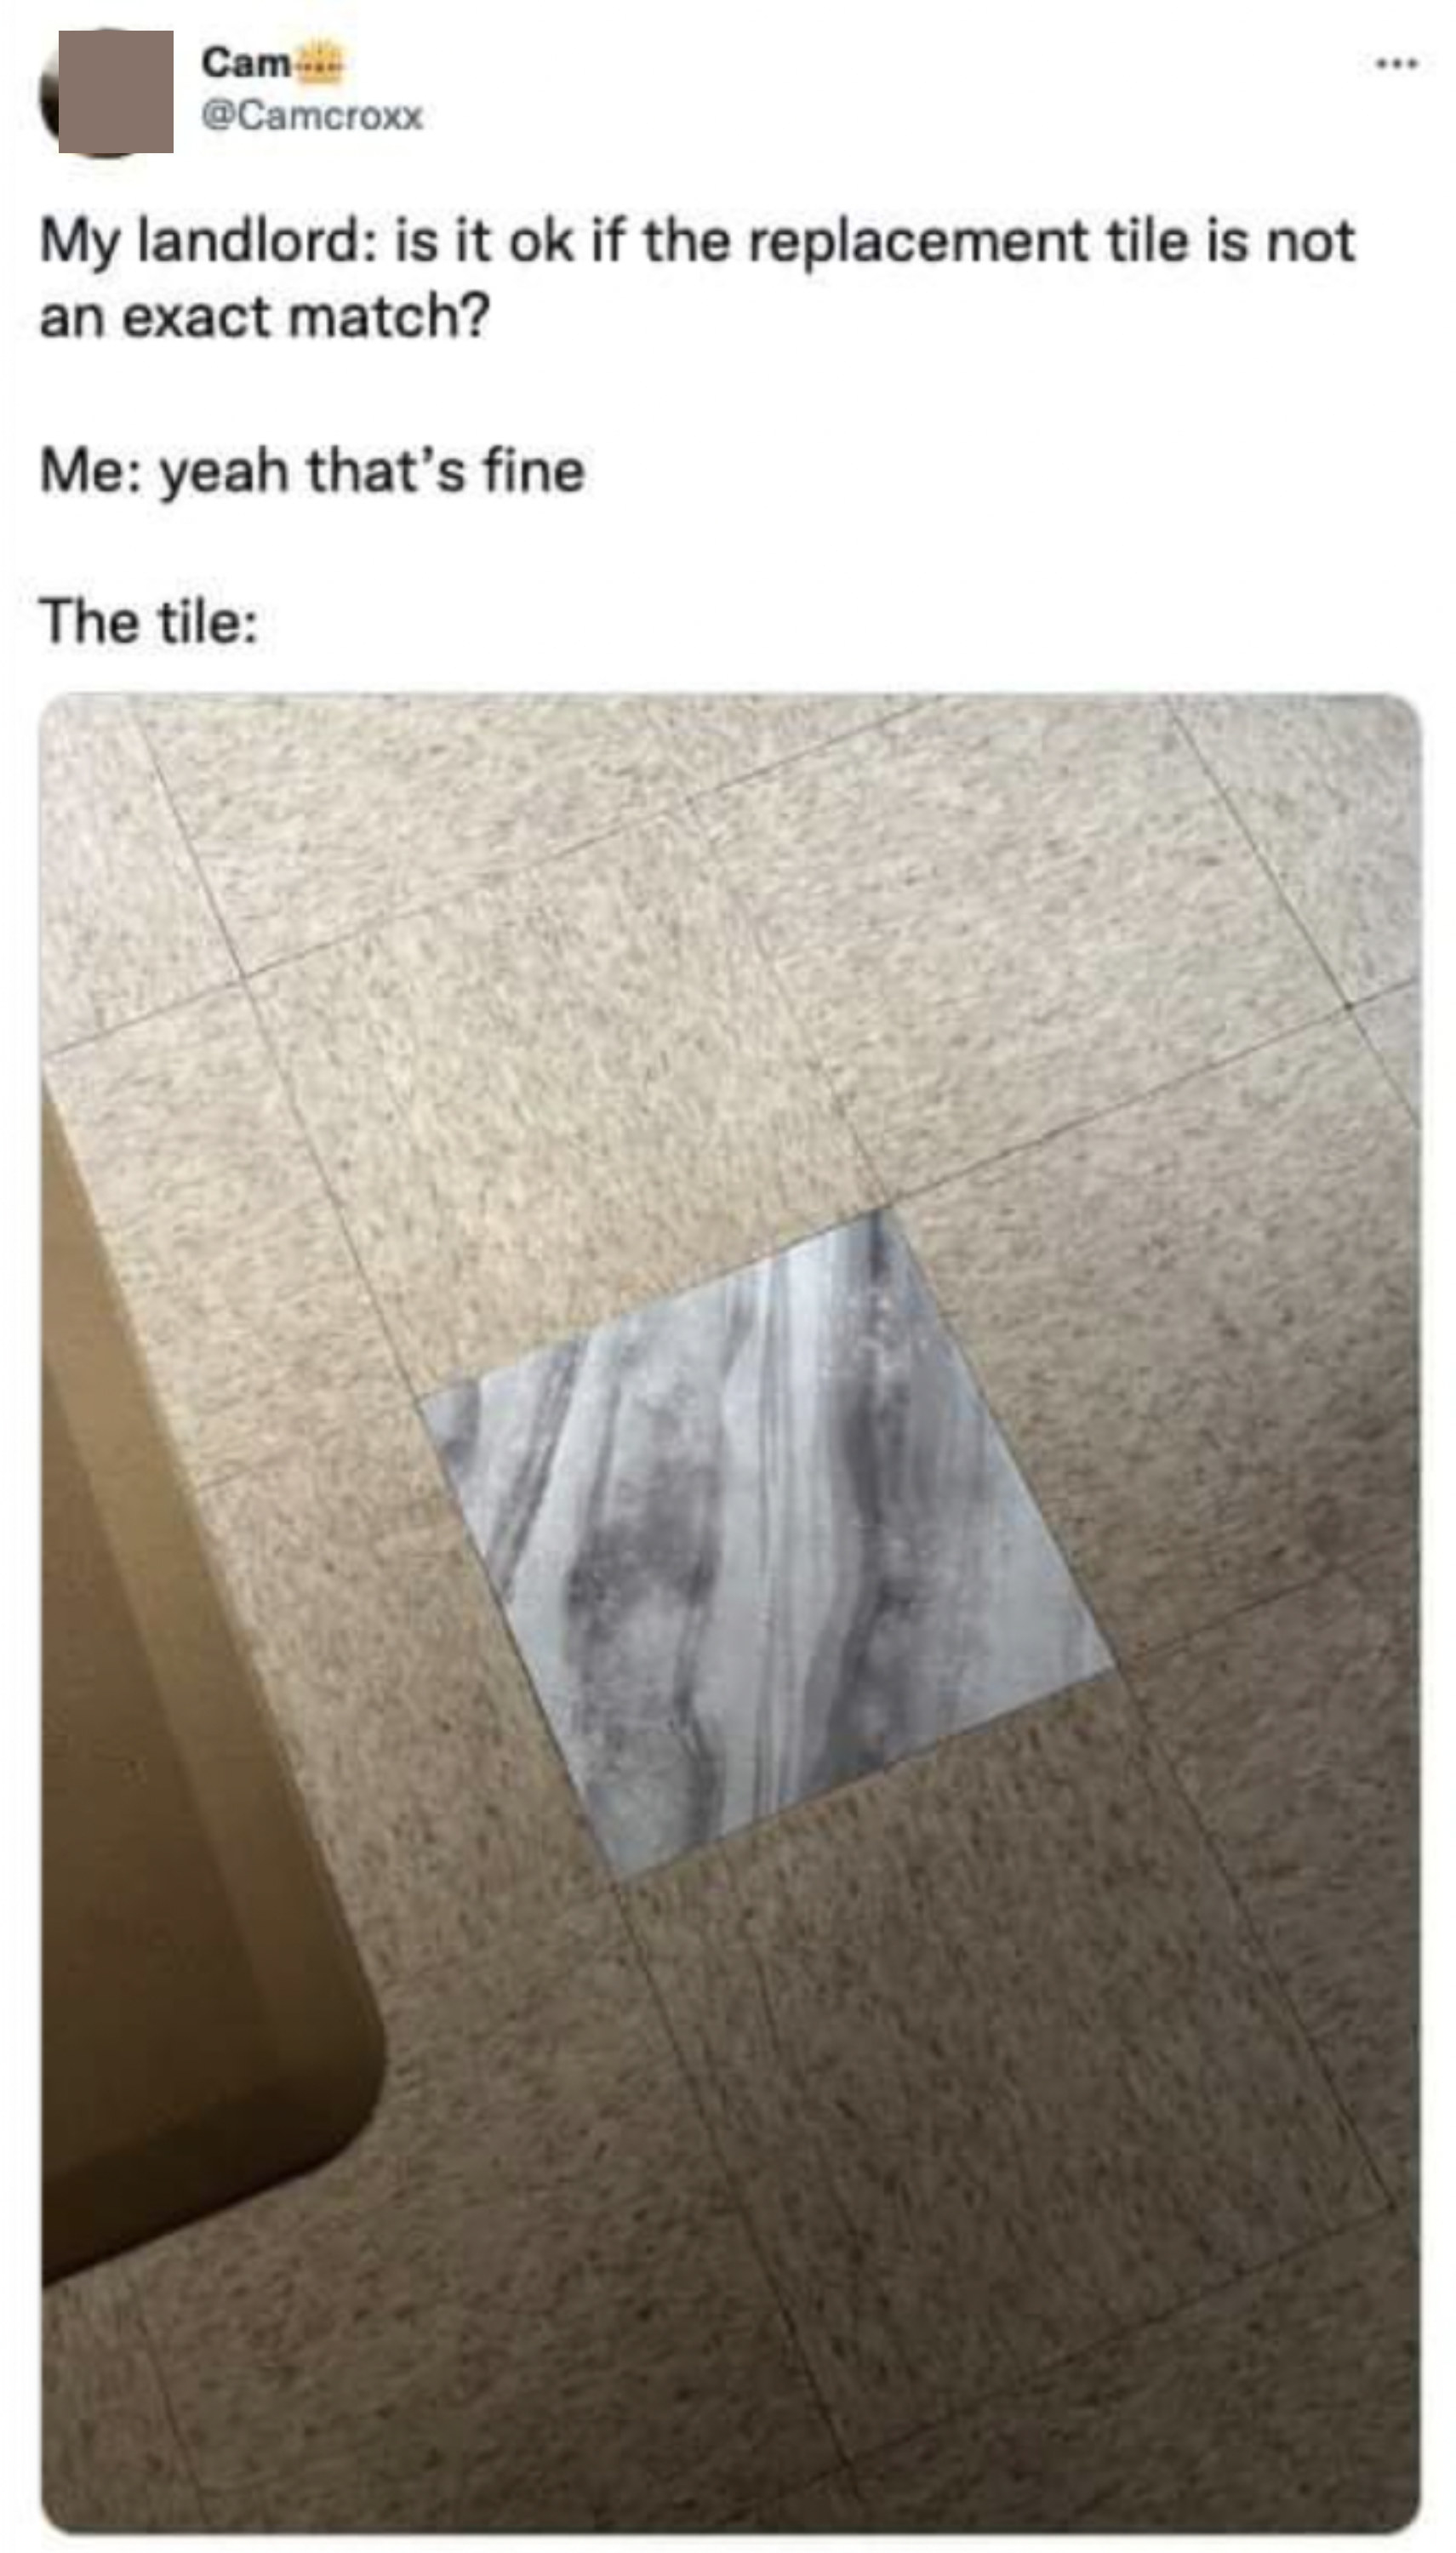 landlord who found a tile that was not close to matching the existing tile